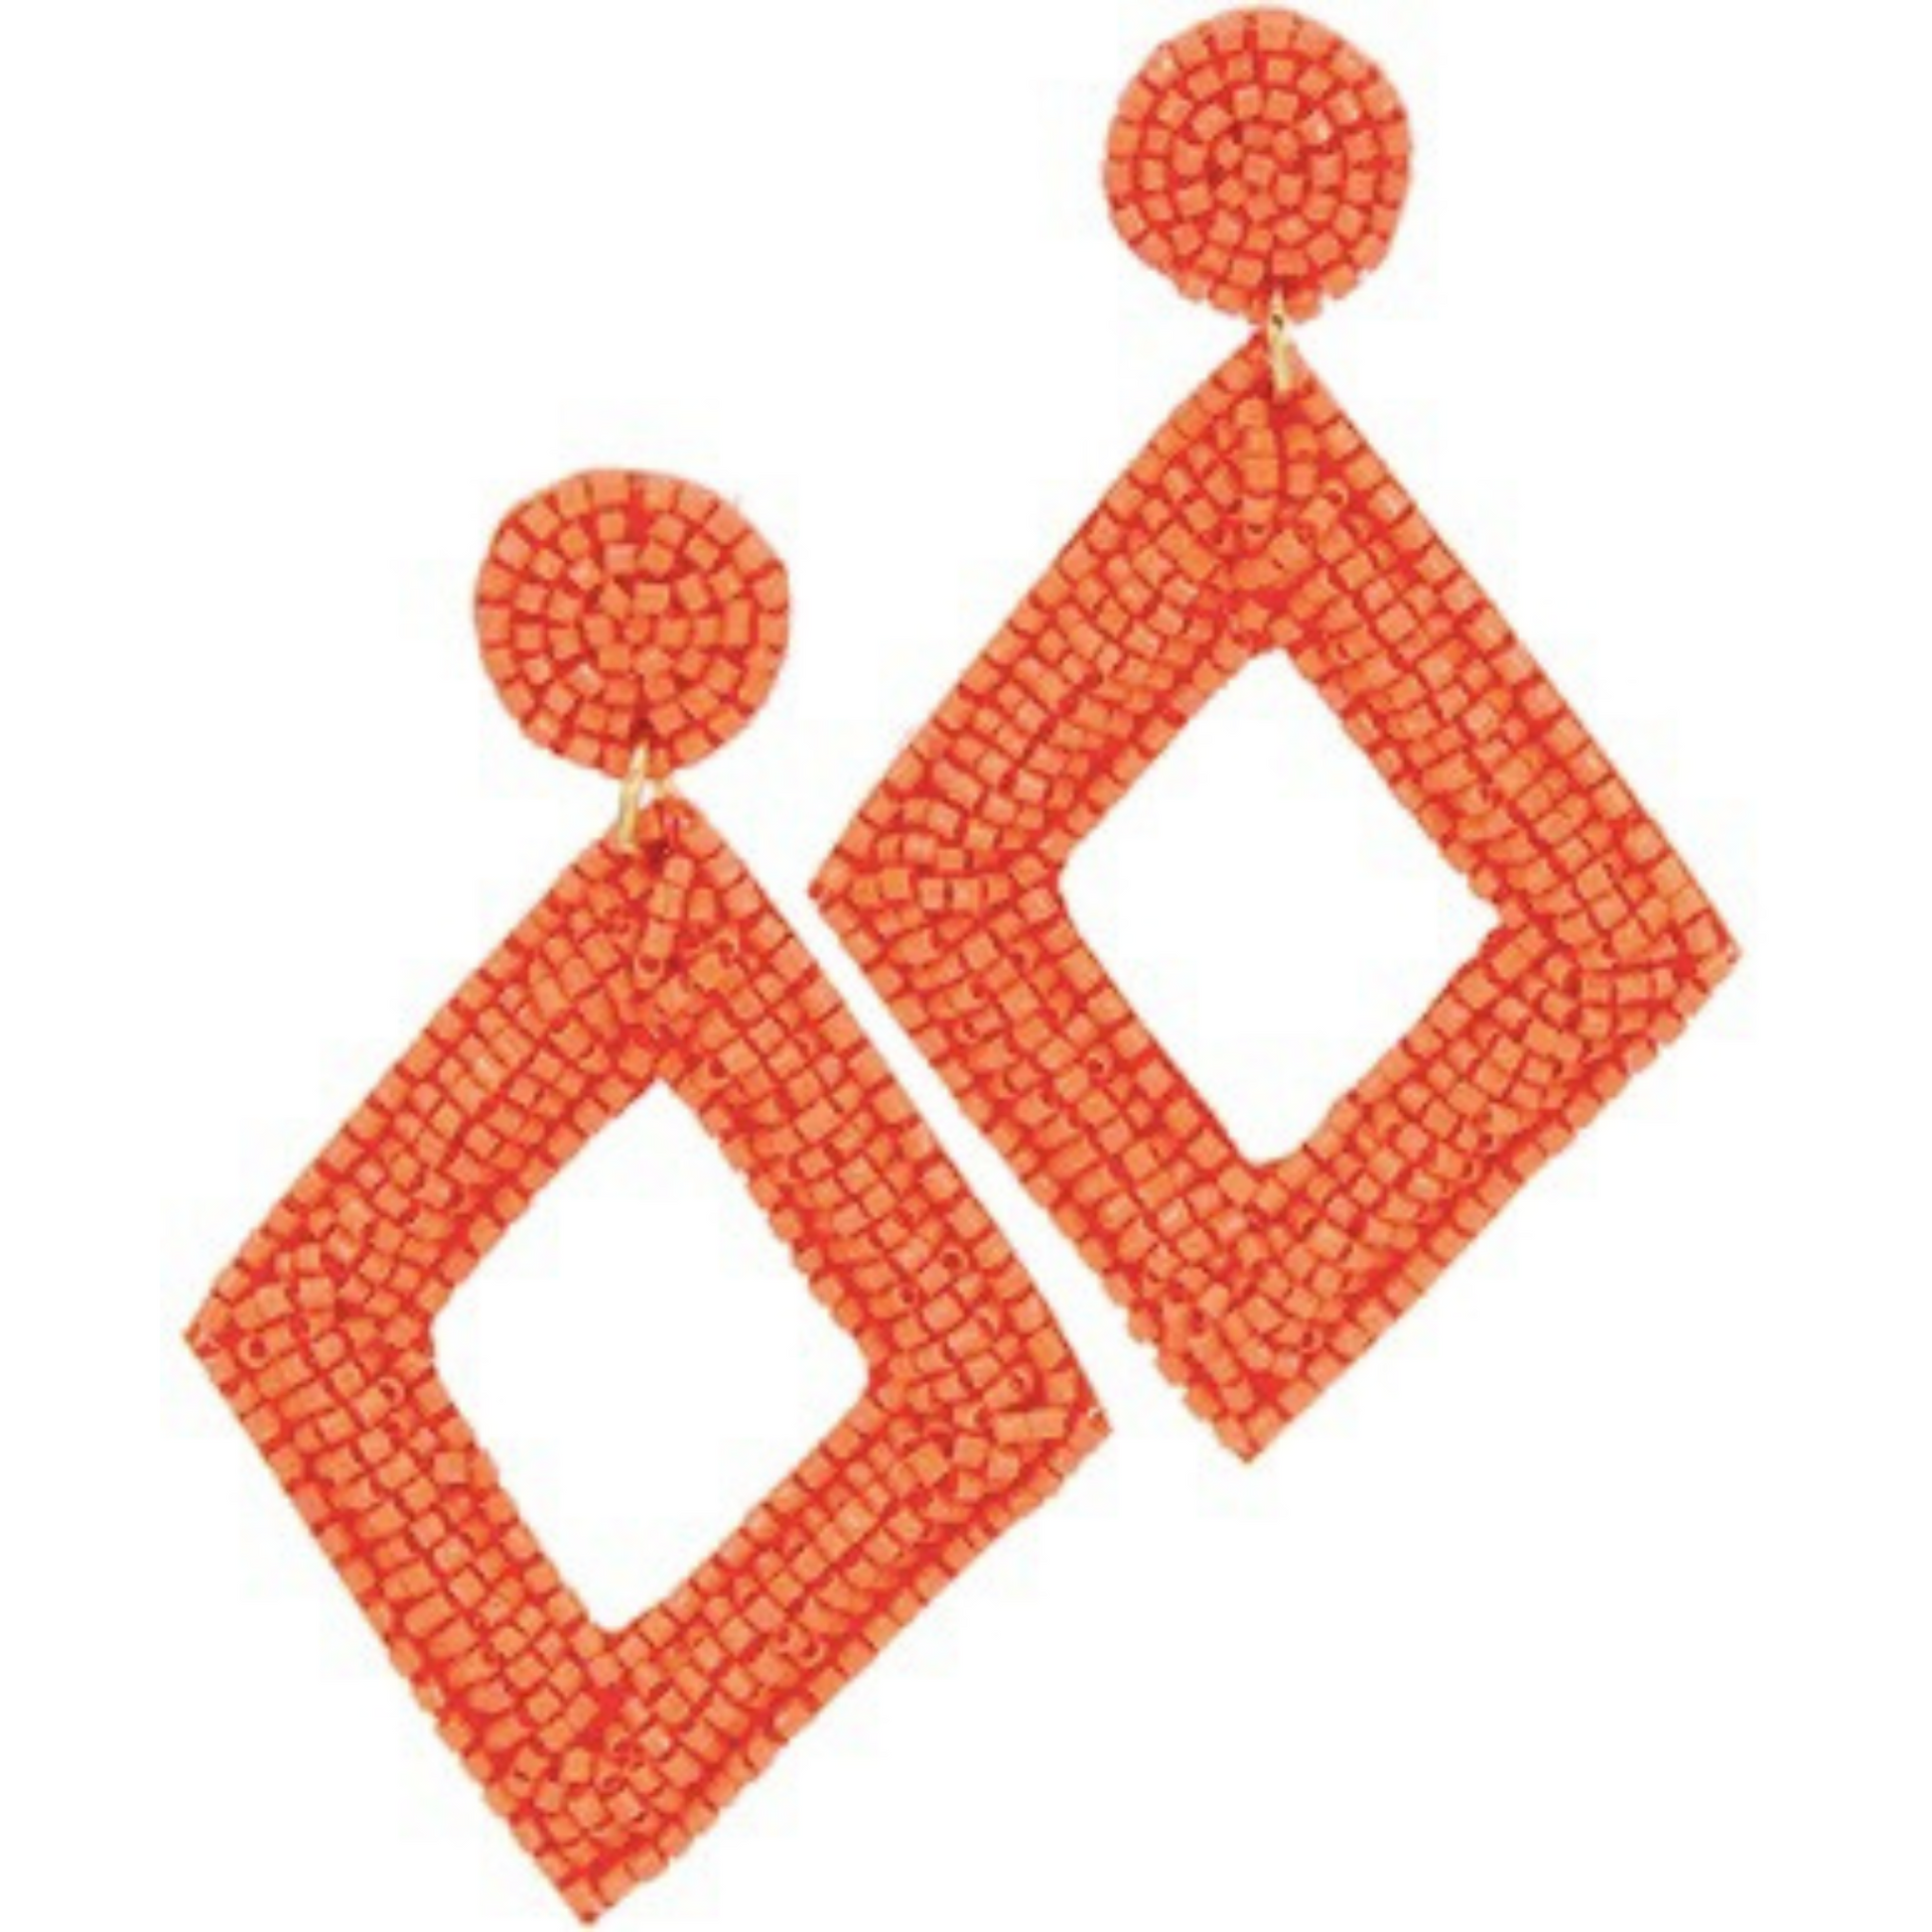 These Diamond Beaded Hoops are perfect for any occasion. Their unique diamond-shaped design features two distinct colors, blue and orange, and includes a beautiful beading that wraps around the entire hoop. They dangle delicately for a stunning effect that is sure to get noticed.